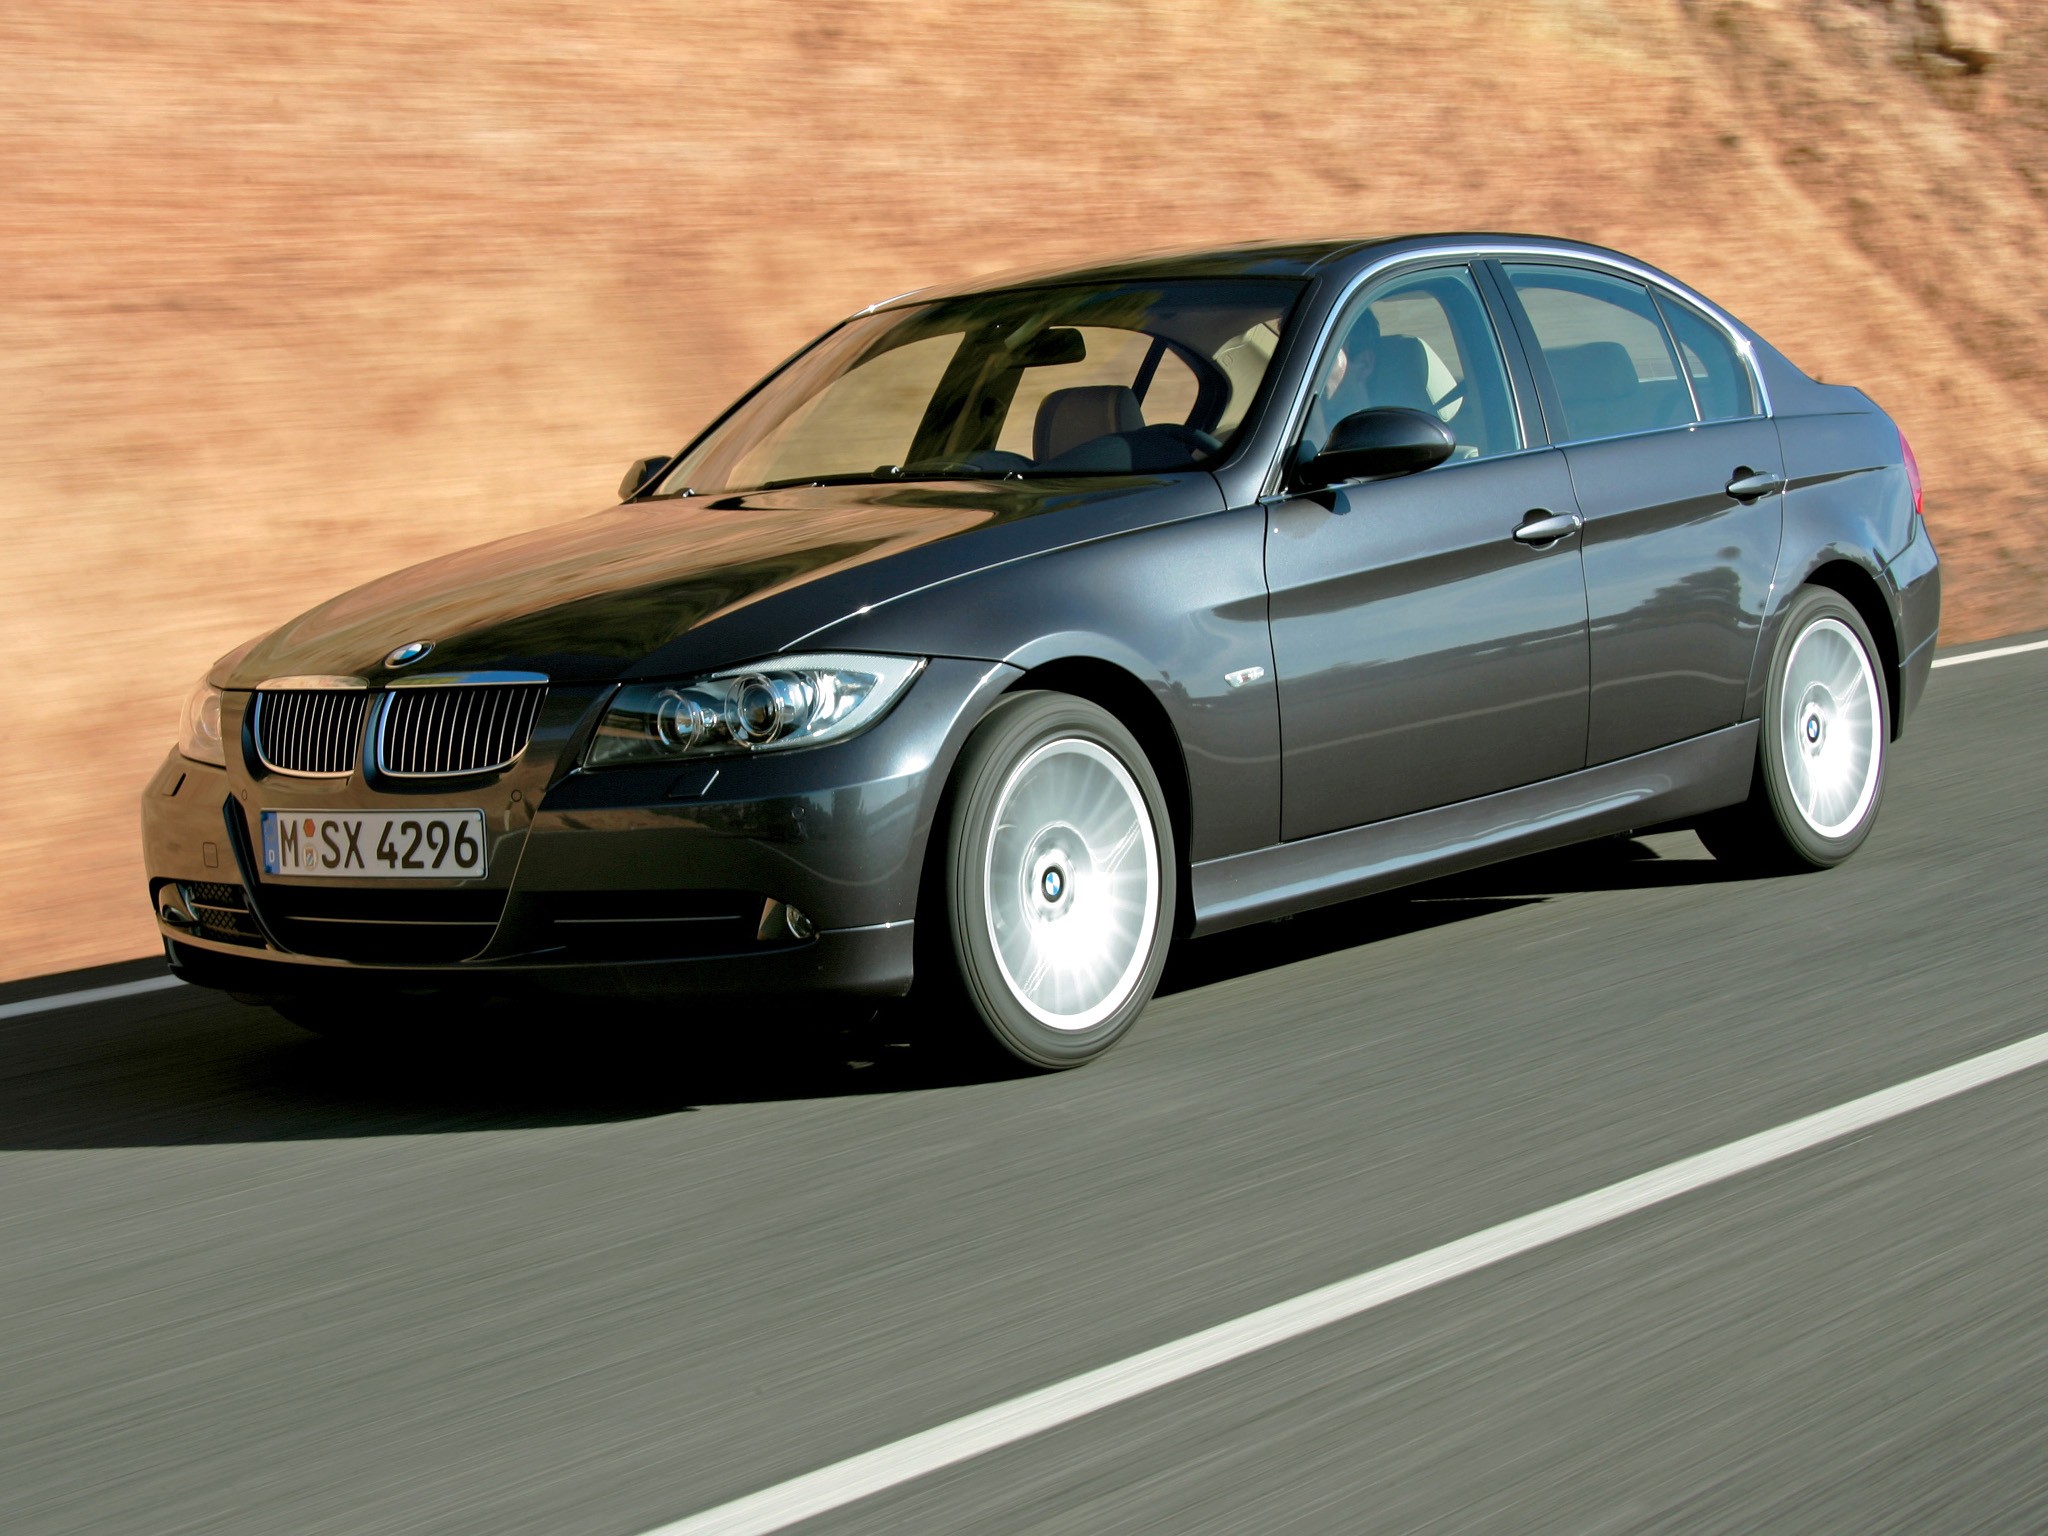 BMW 330 2005 Review, Amazing Pictures and Images Look